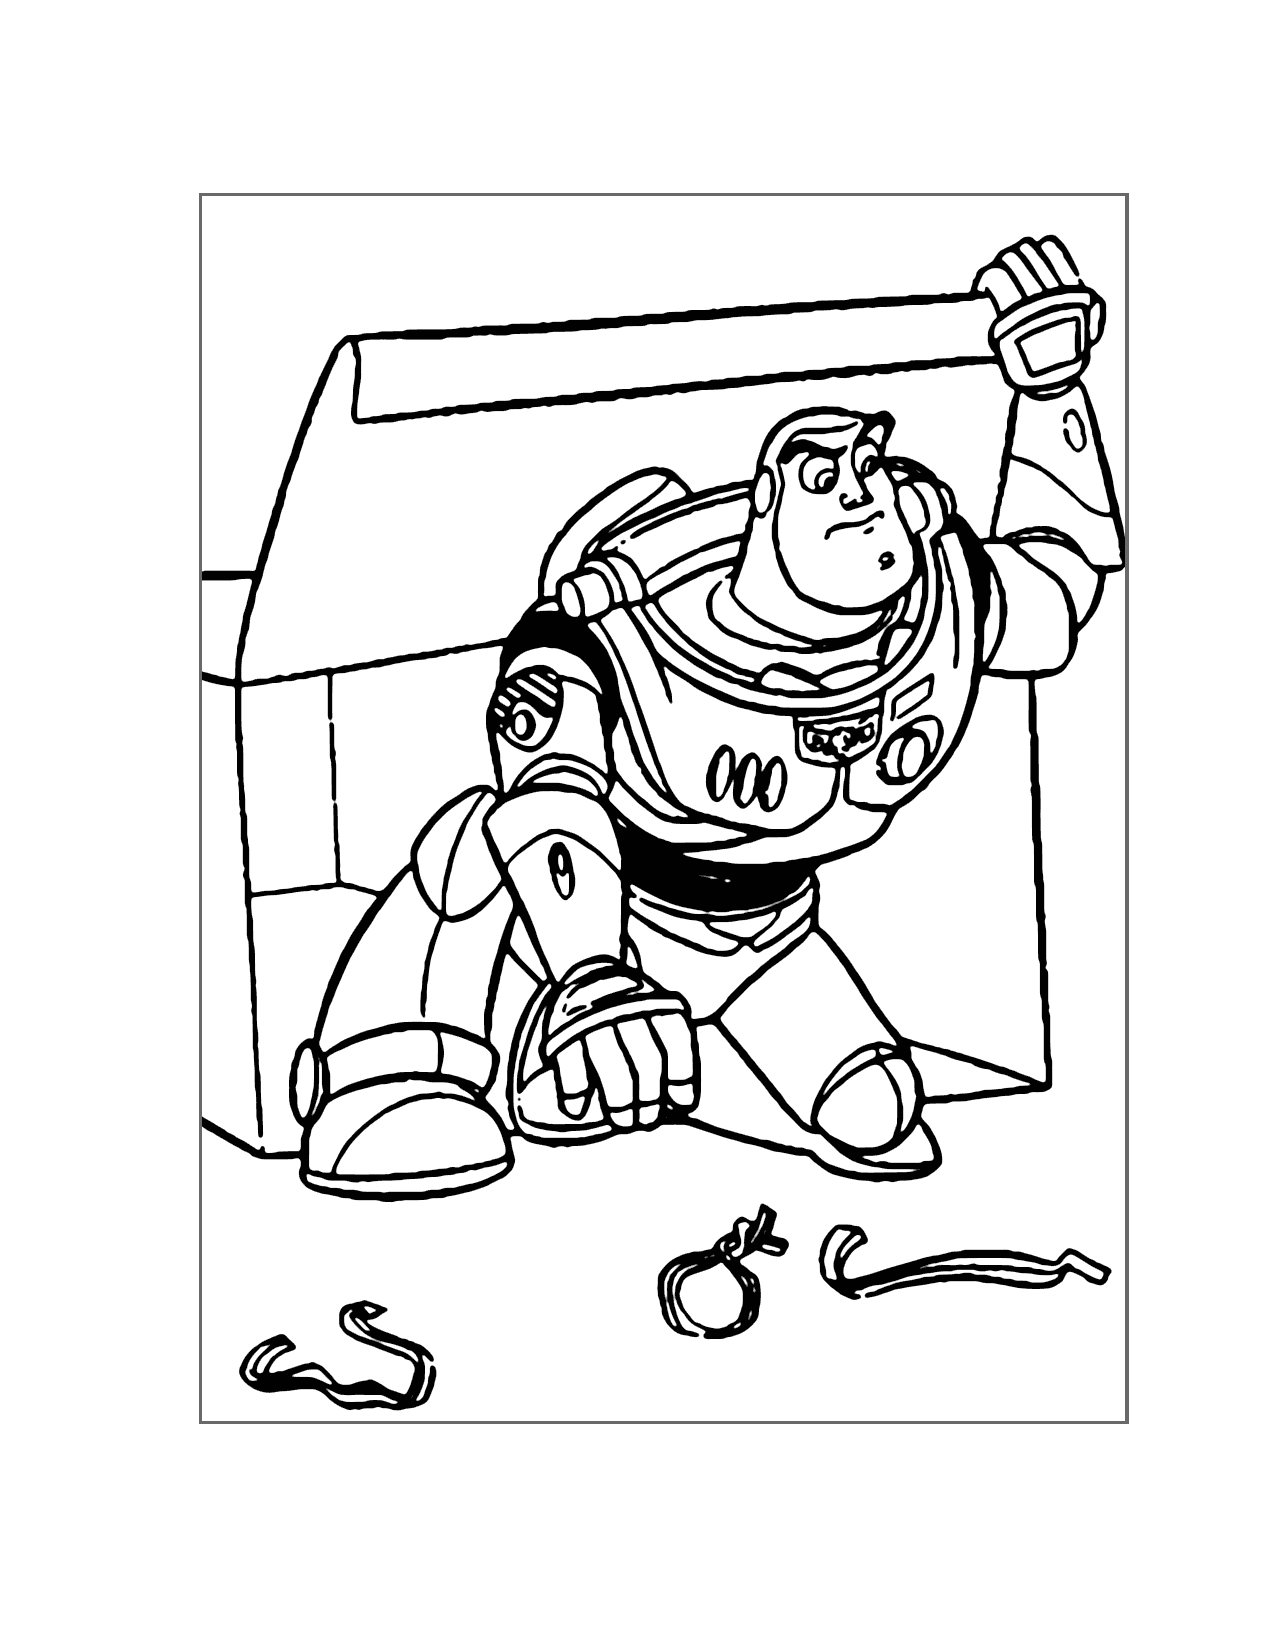 Buzz Lightyear Hides In A Box Coloring Page